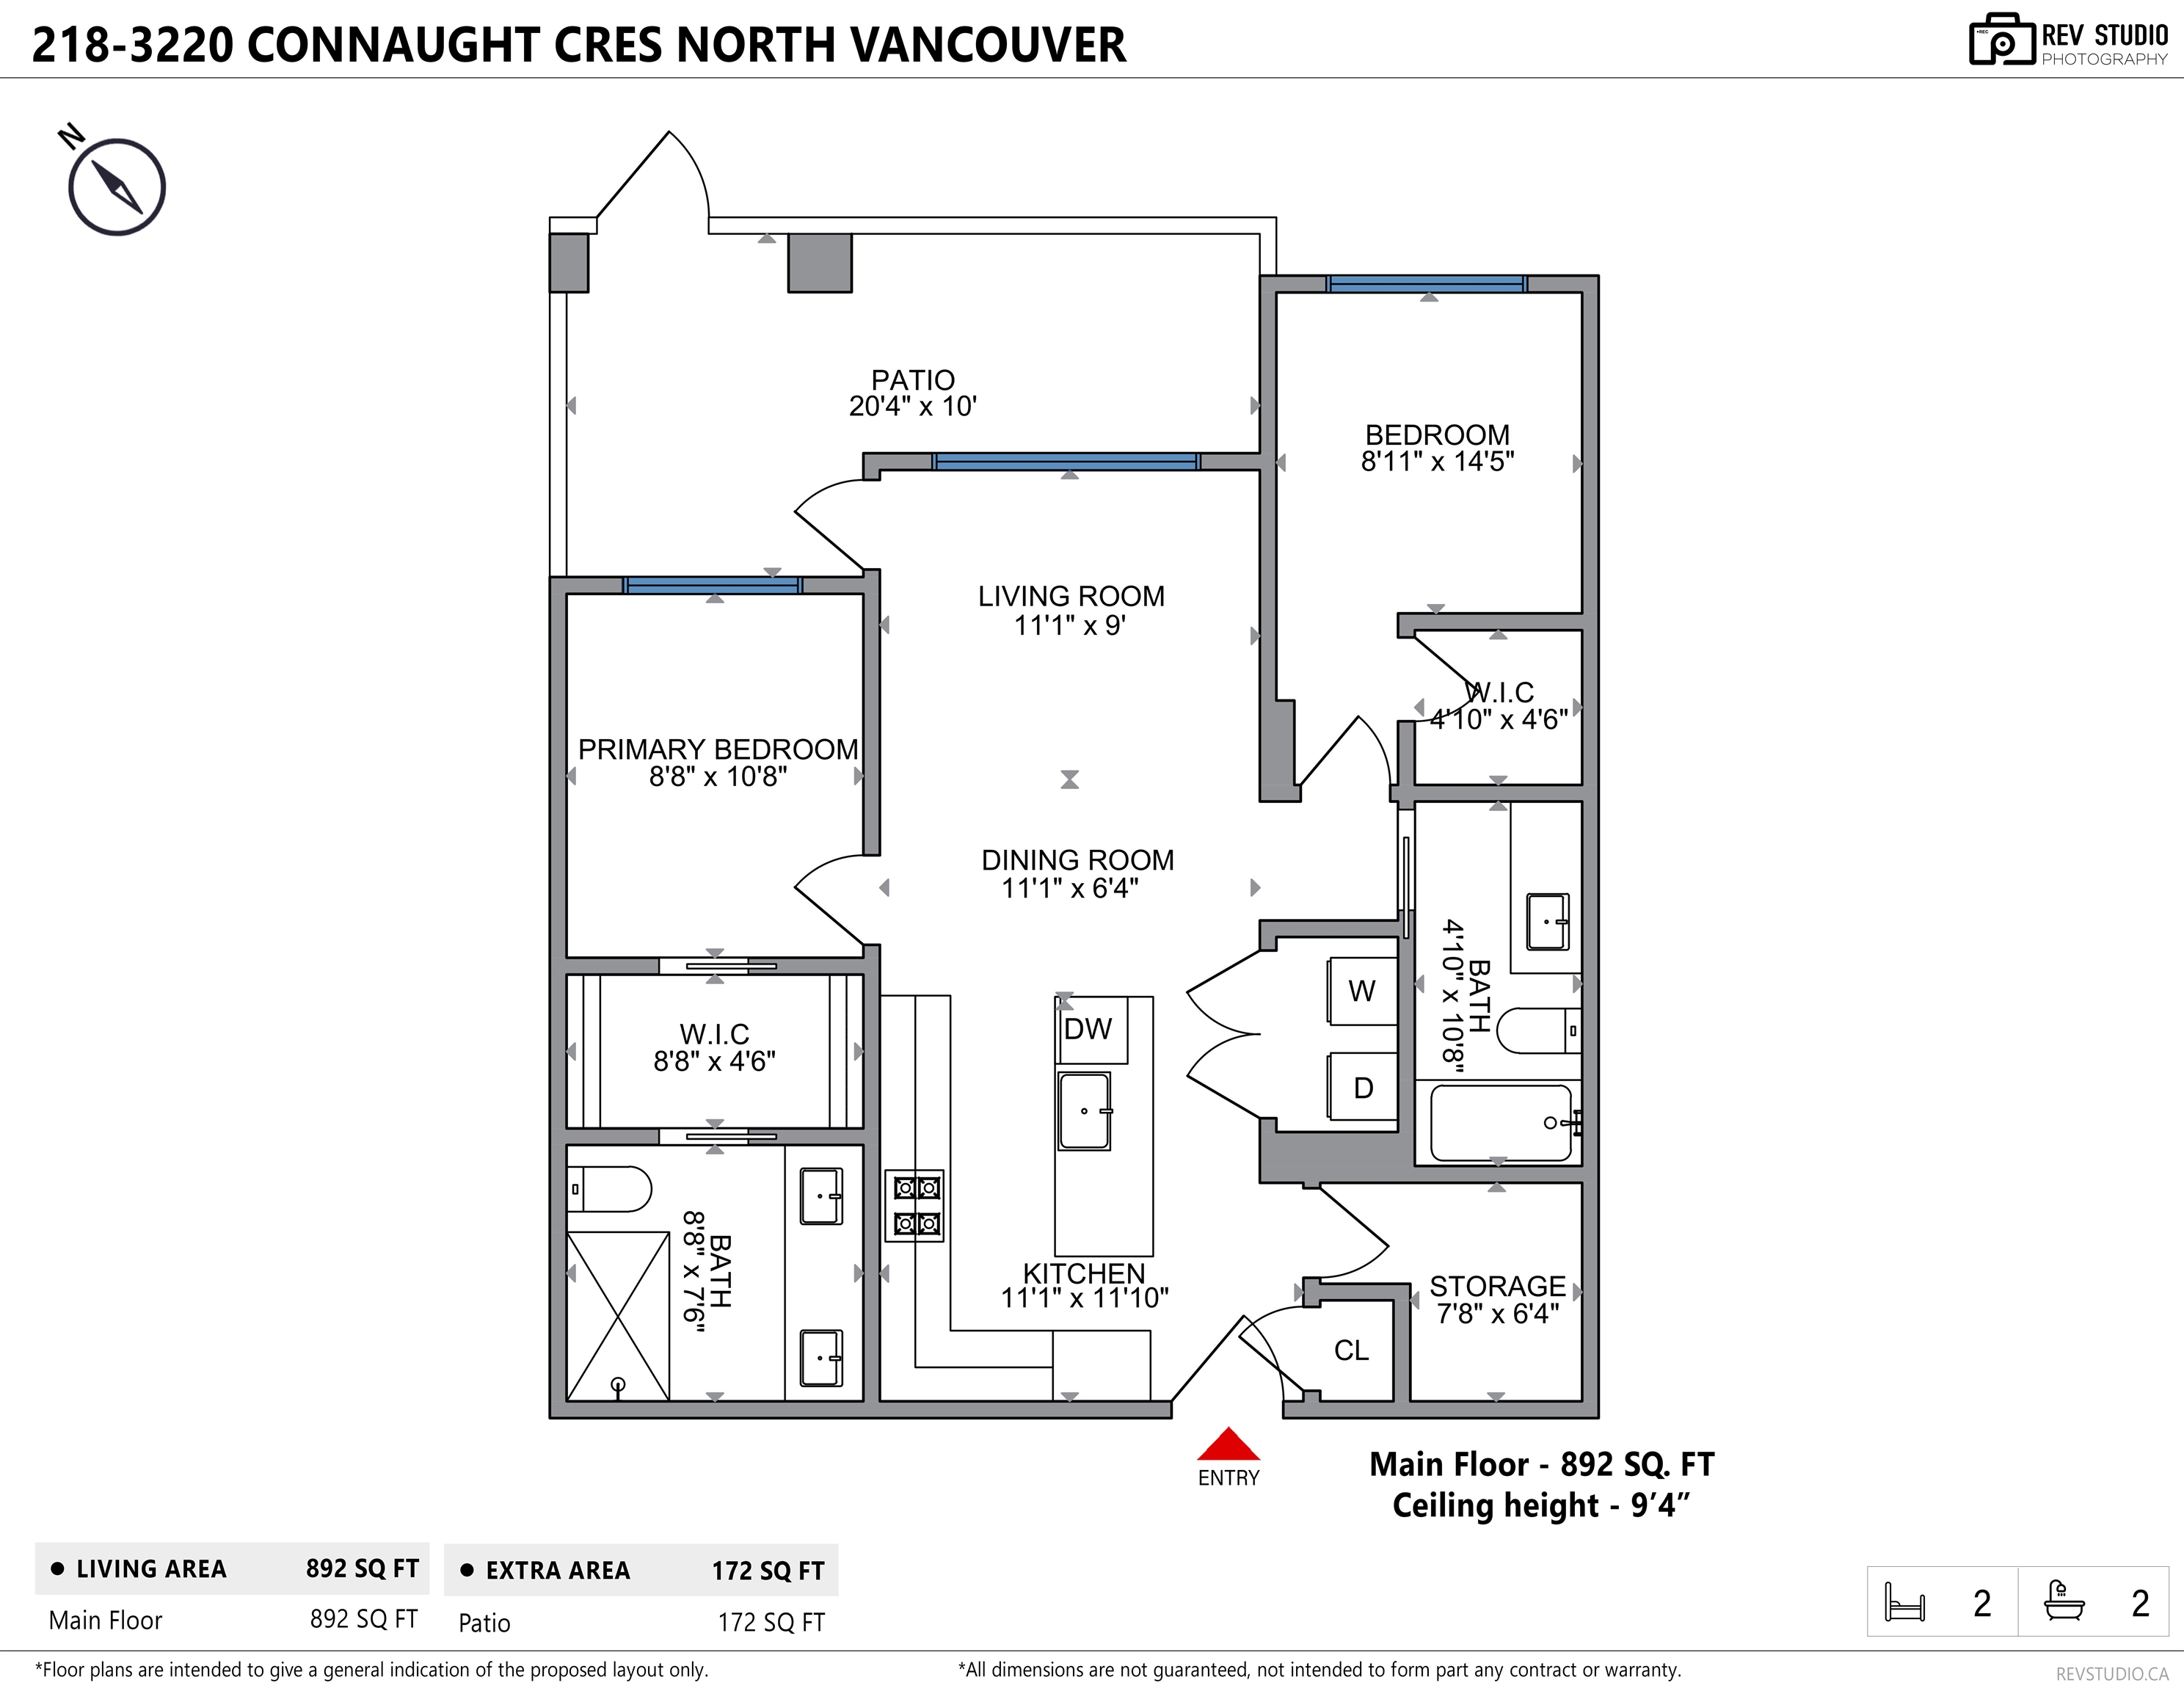 Listing image of 218 3220 CONNAUGHT CRESCENT